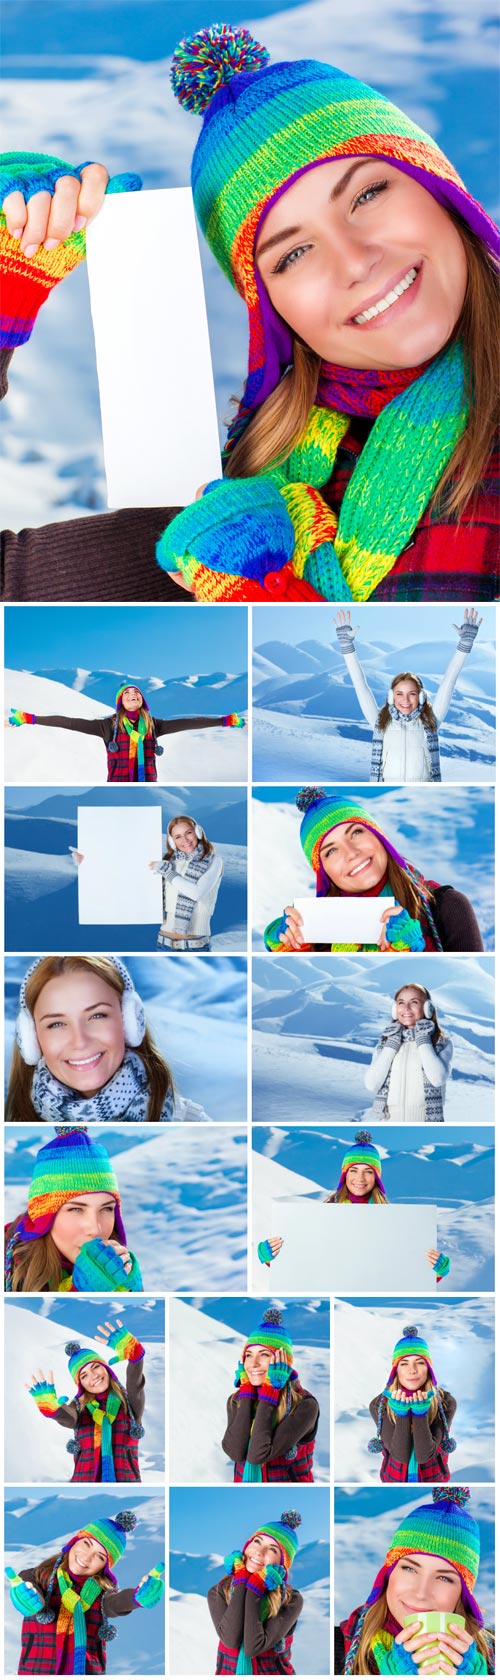 Girl enjoying snowy winter weather, christmas holidays in the mountains - Stock photo